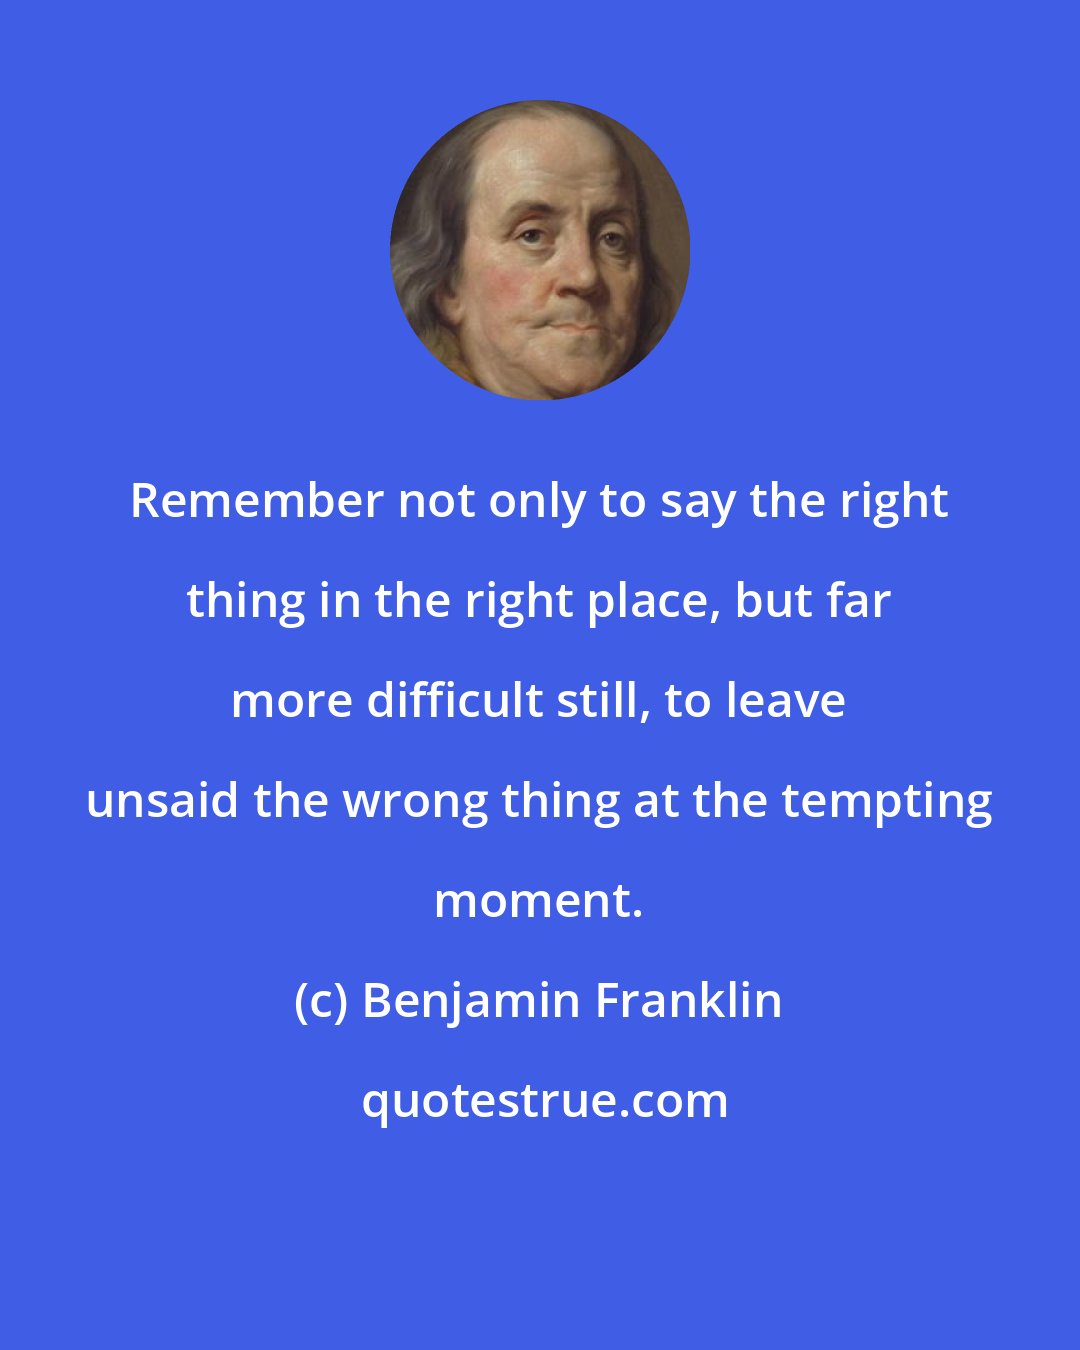 Benjamin Franklin: Remember not only to say the right thing in the right place, but far more difficult still, to leave unsaid the wrong thing at the tempting moment.